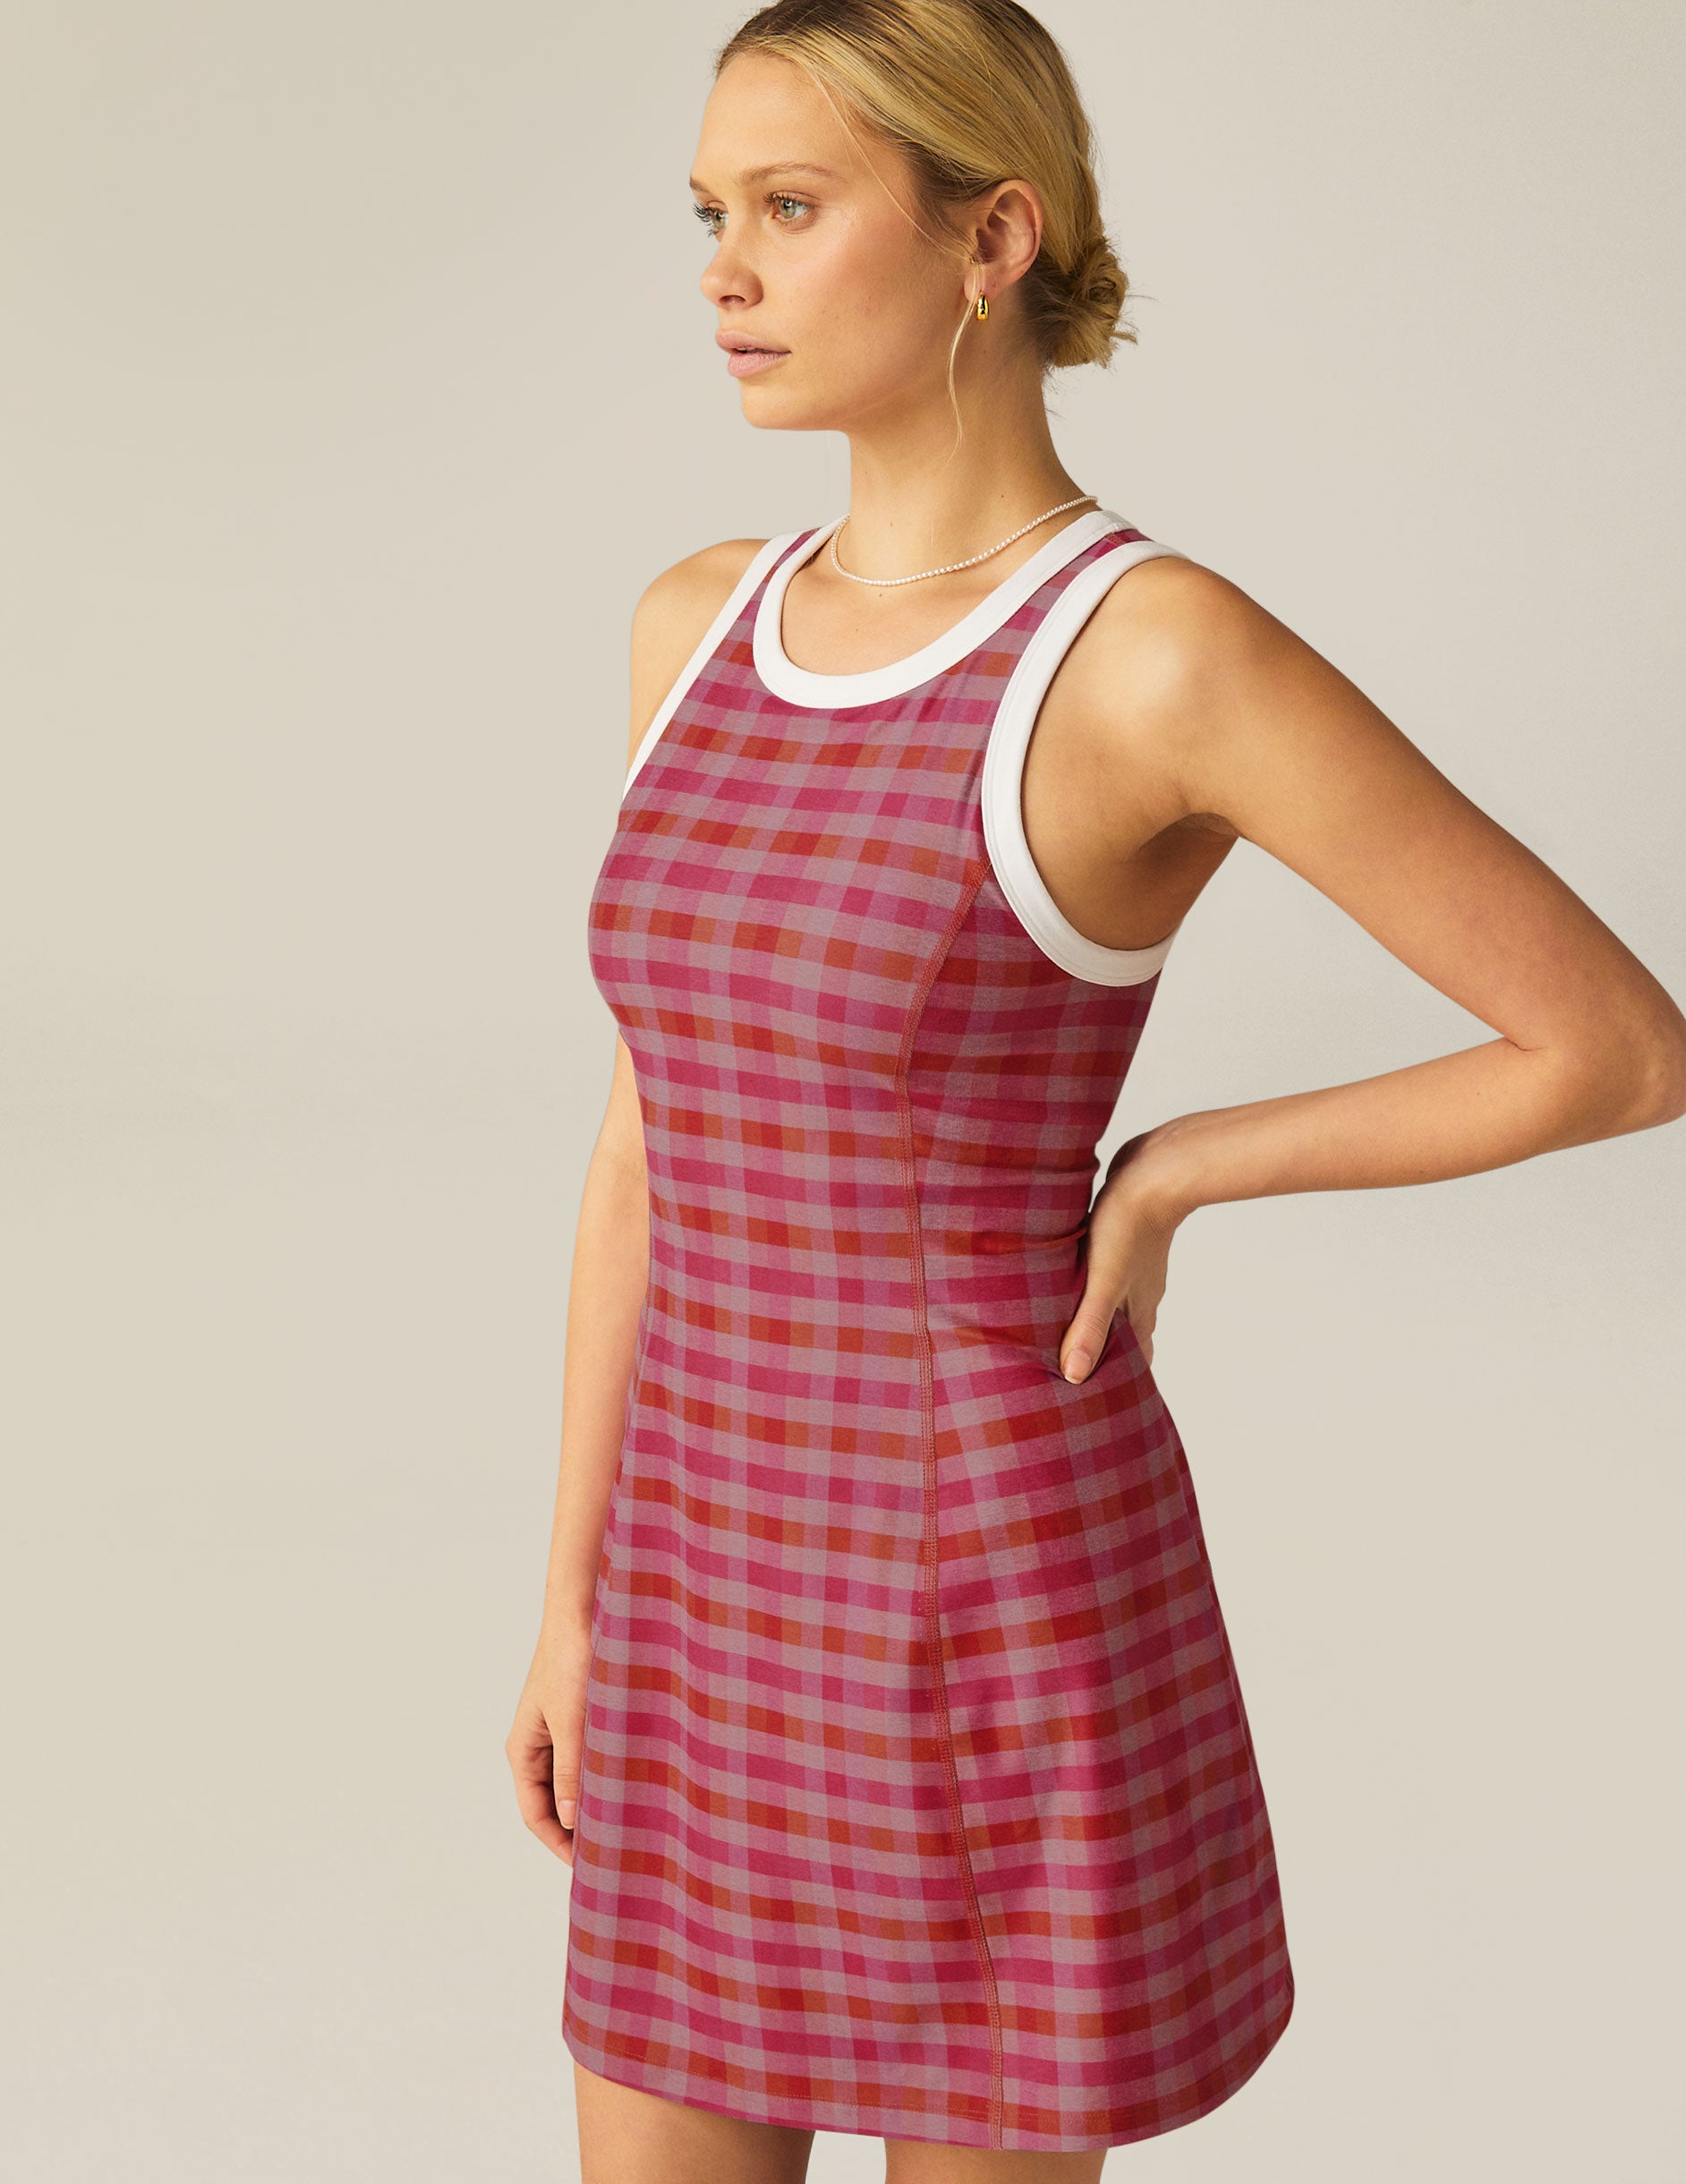 pink gingham printed mini dress with white outlining on arm holes and neckline. 